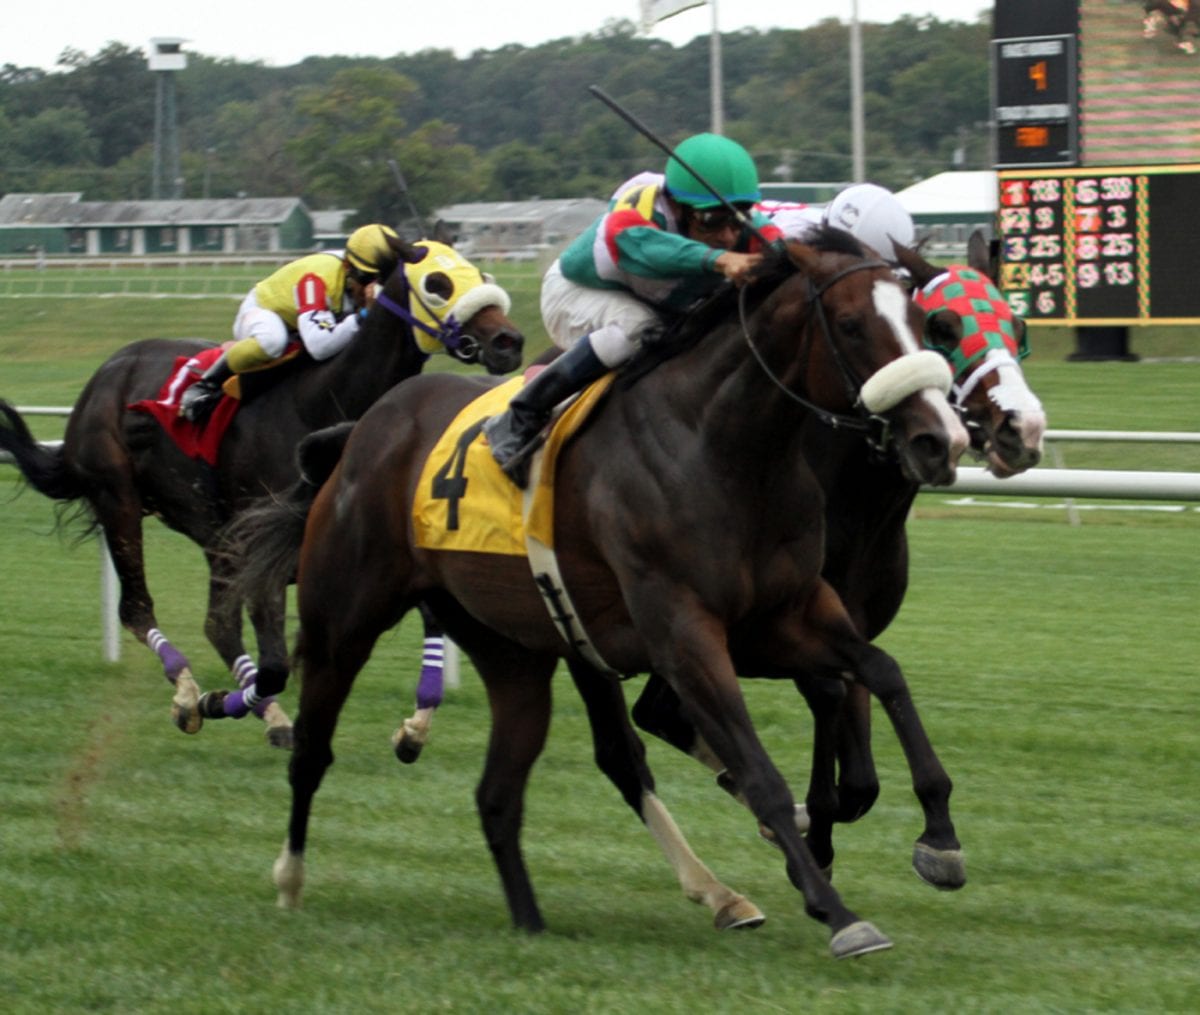 Take part in our Maryland Million Charity “Play for Jose” Handicapping Tournament